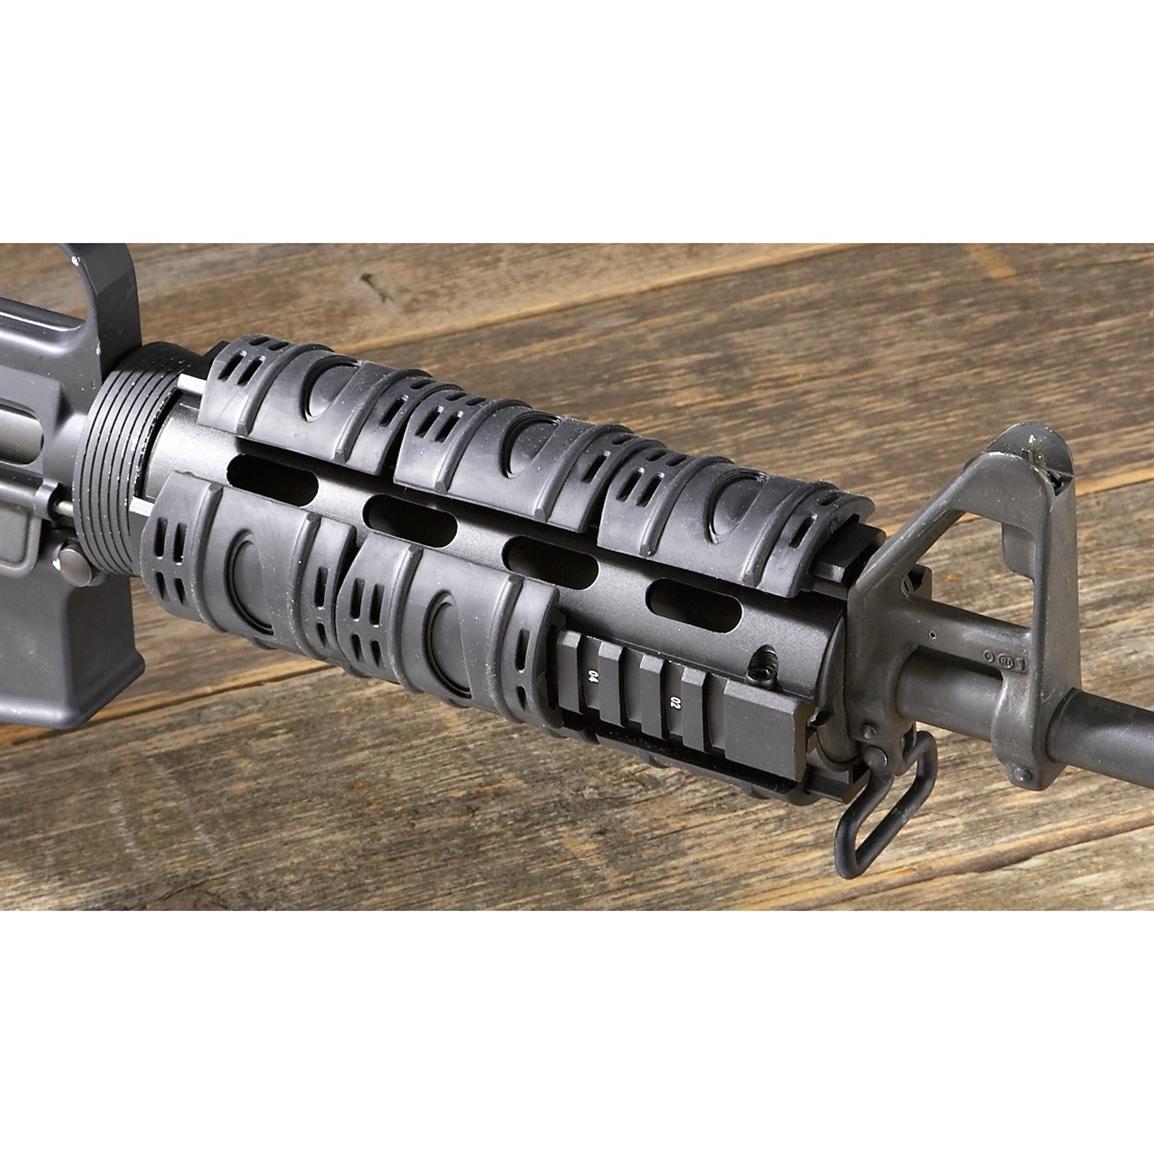 6 M4 Quad Rail With Covers 197853 Tactical Rifle Accessories At | Free ...